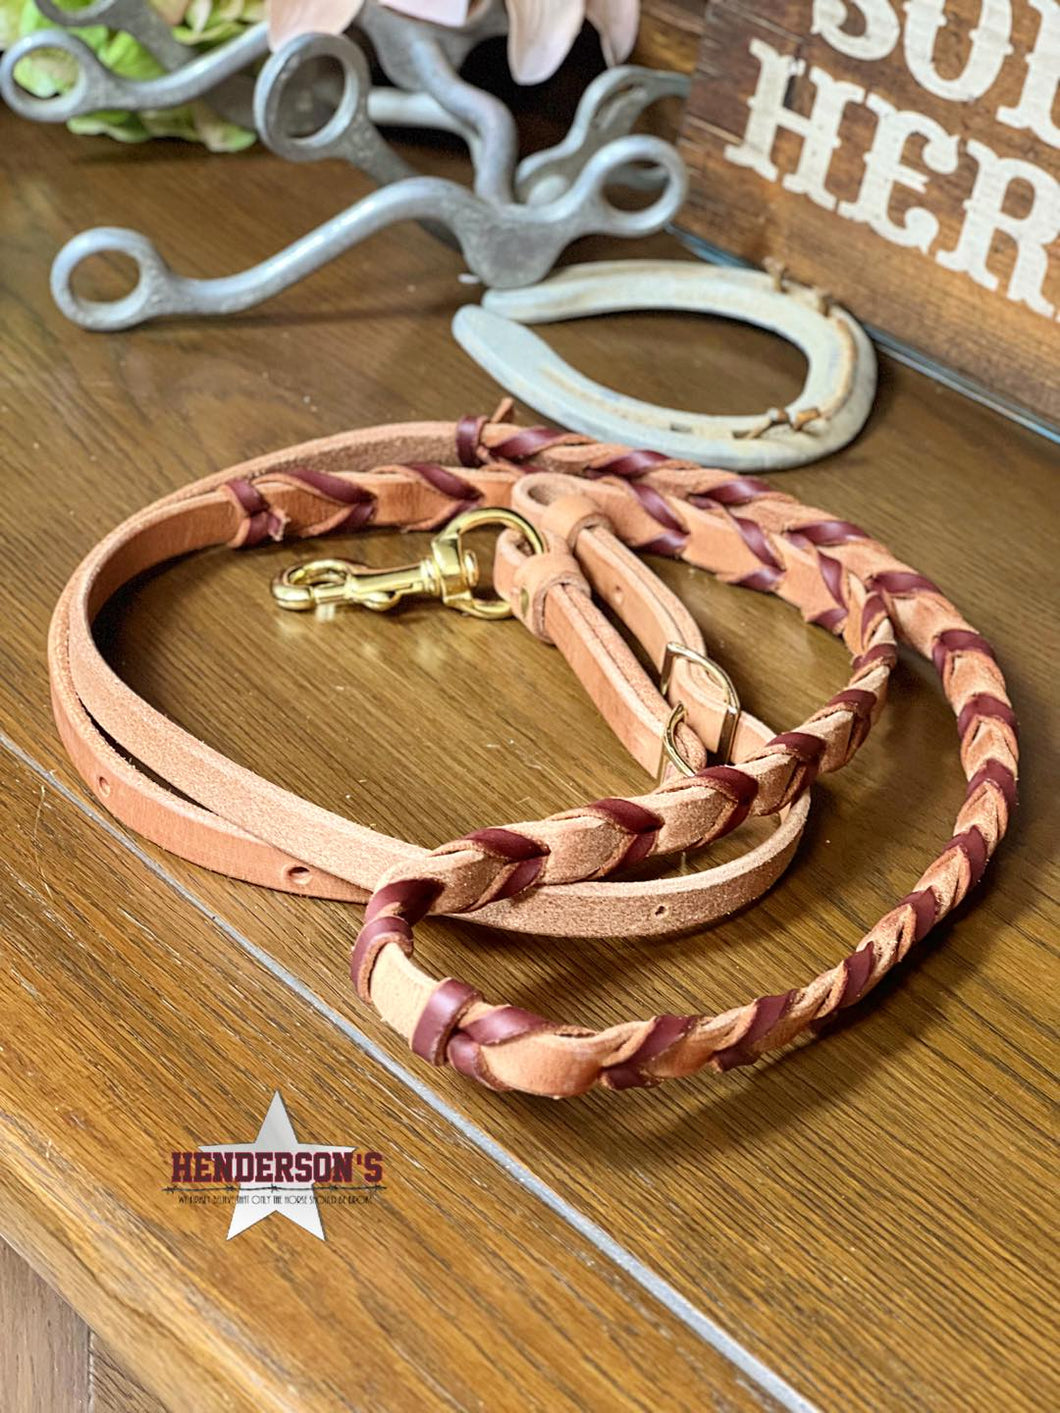 Leather Laced Barrel Reins - Henderson's Western Store